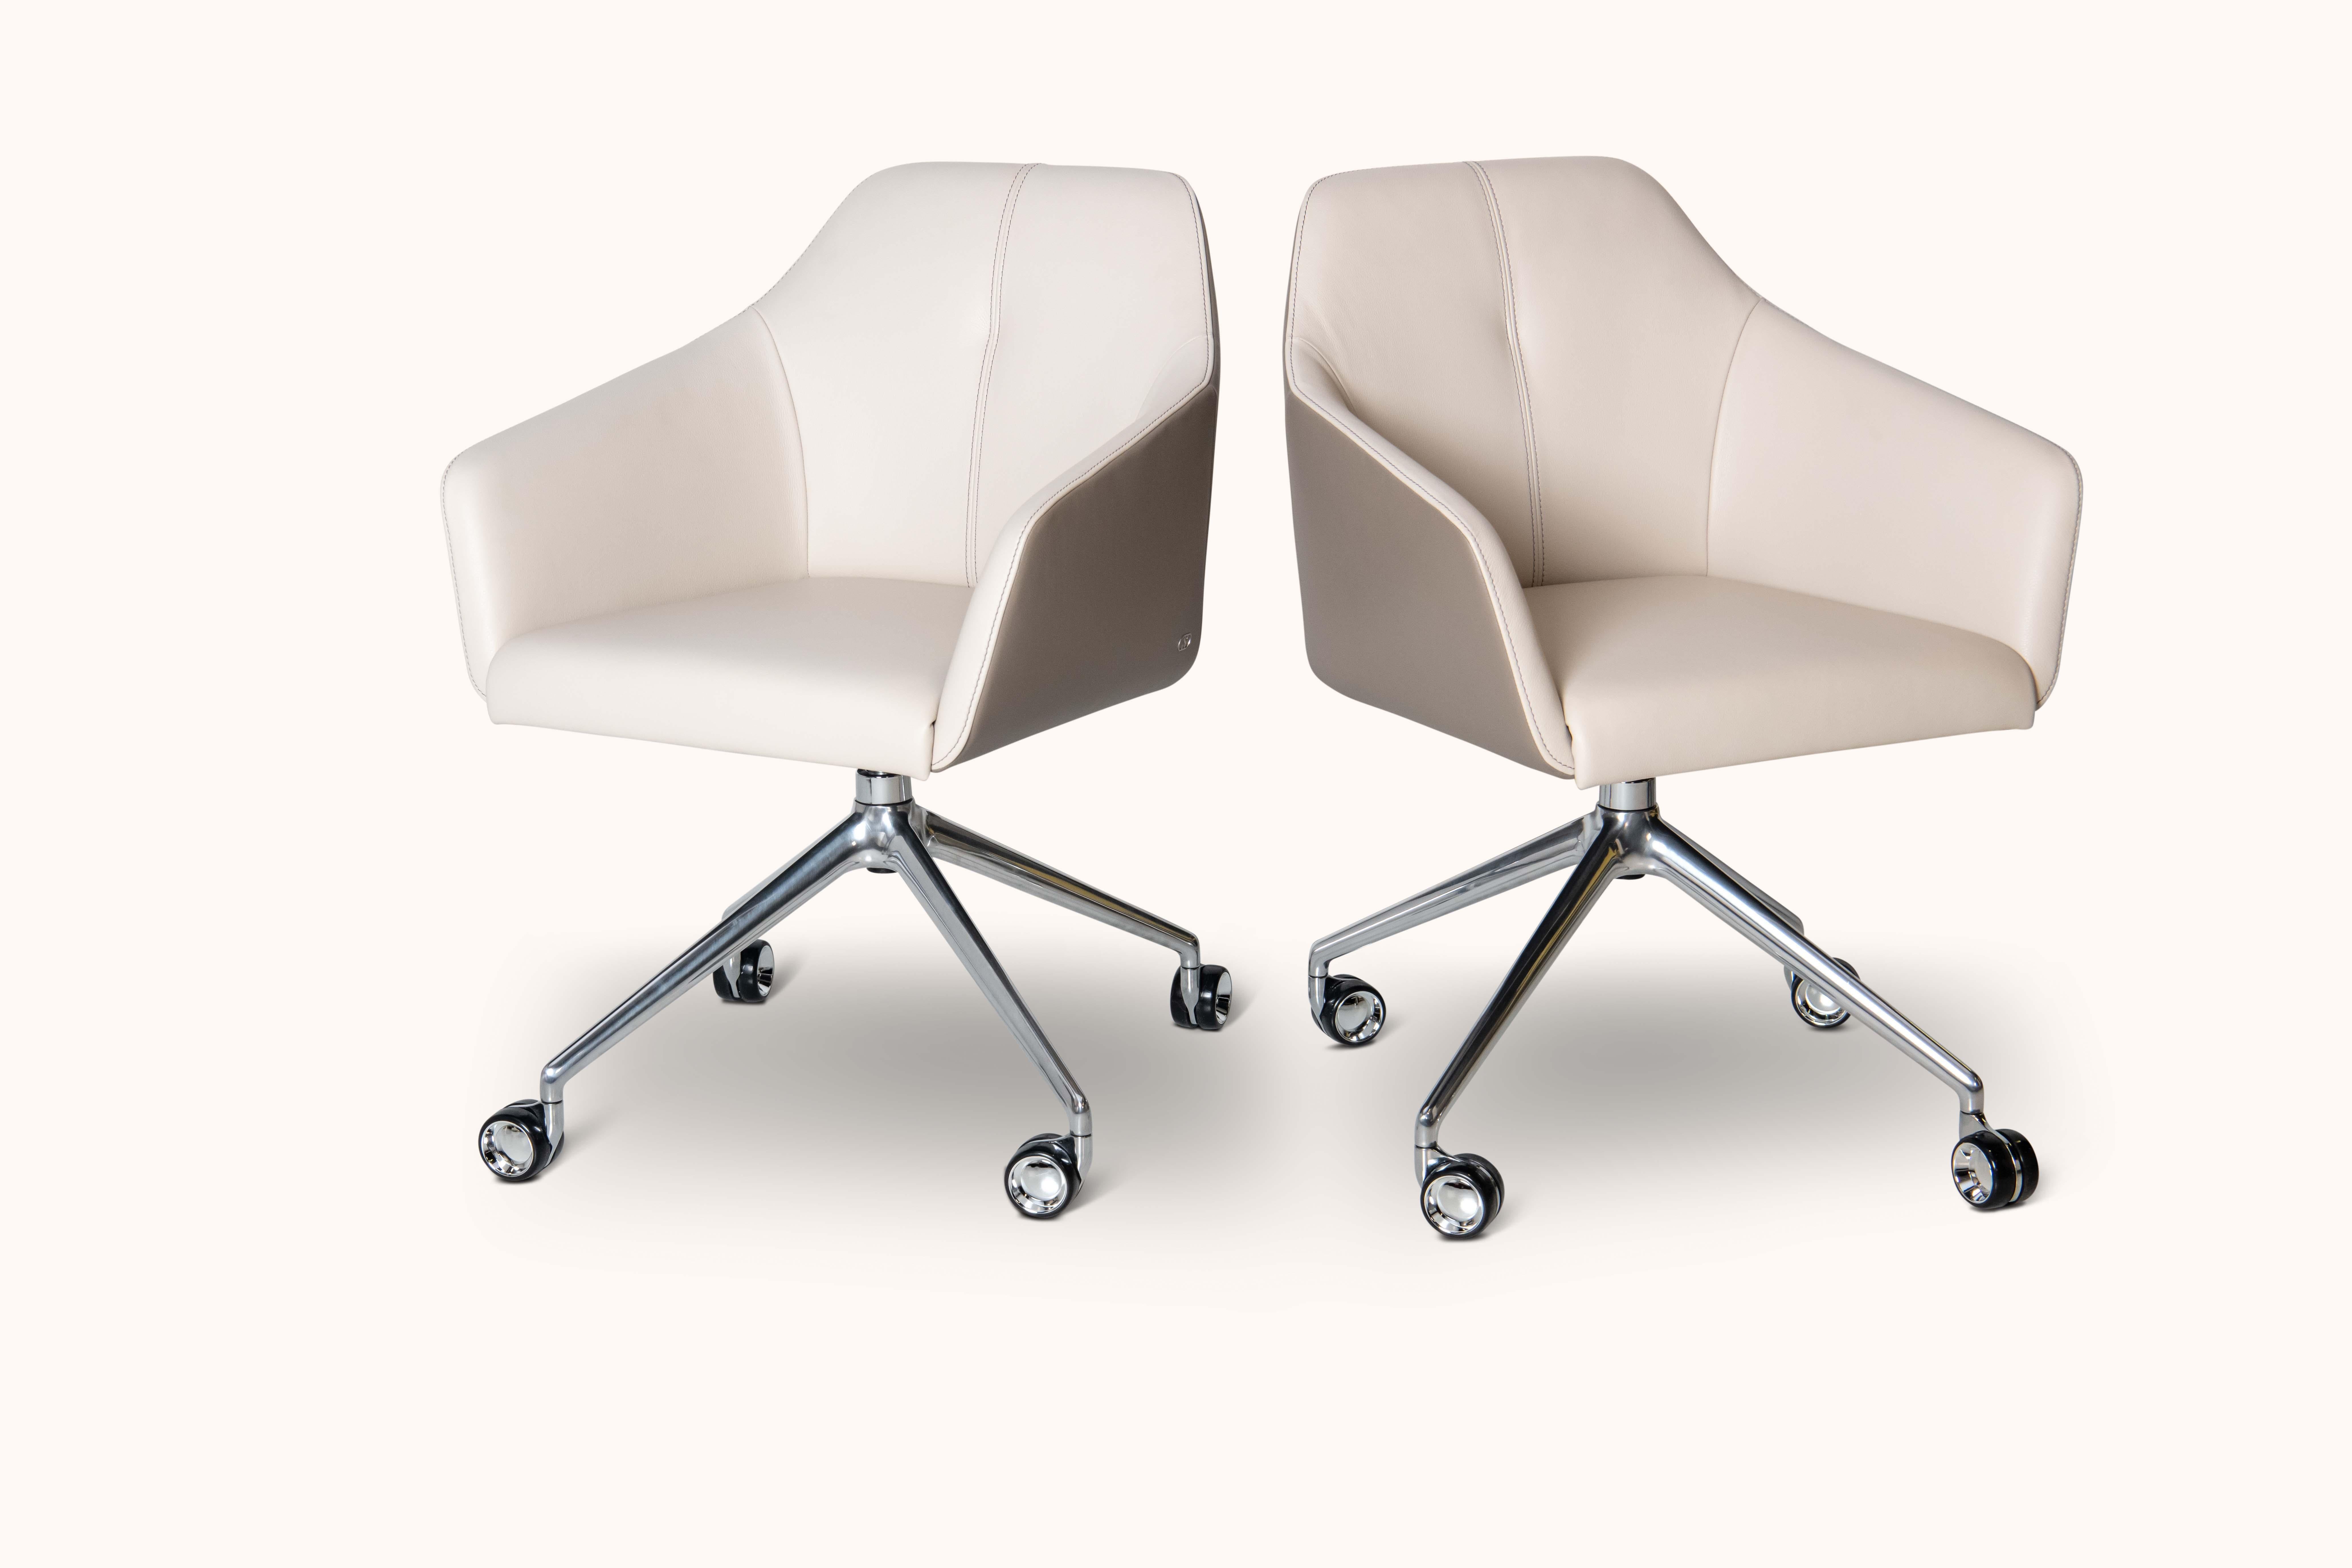 Swiss De Sede DS-279 Office Chair with Castors in Perla Upholstery by Christian Werner For Sale